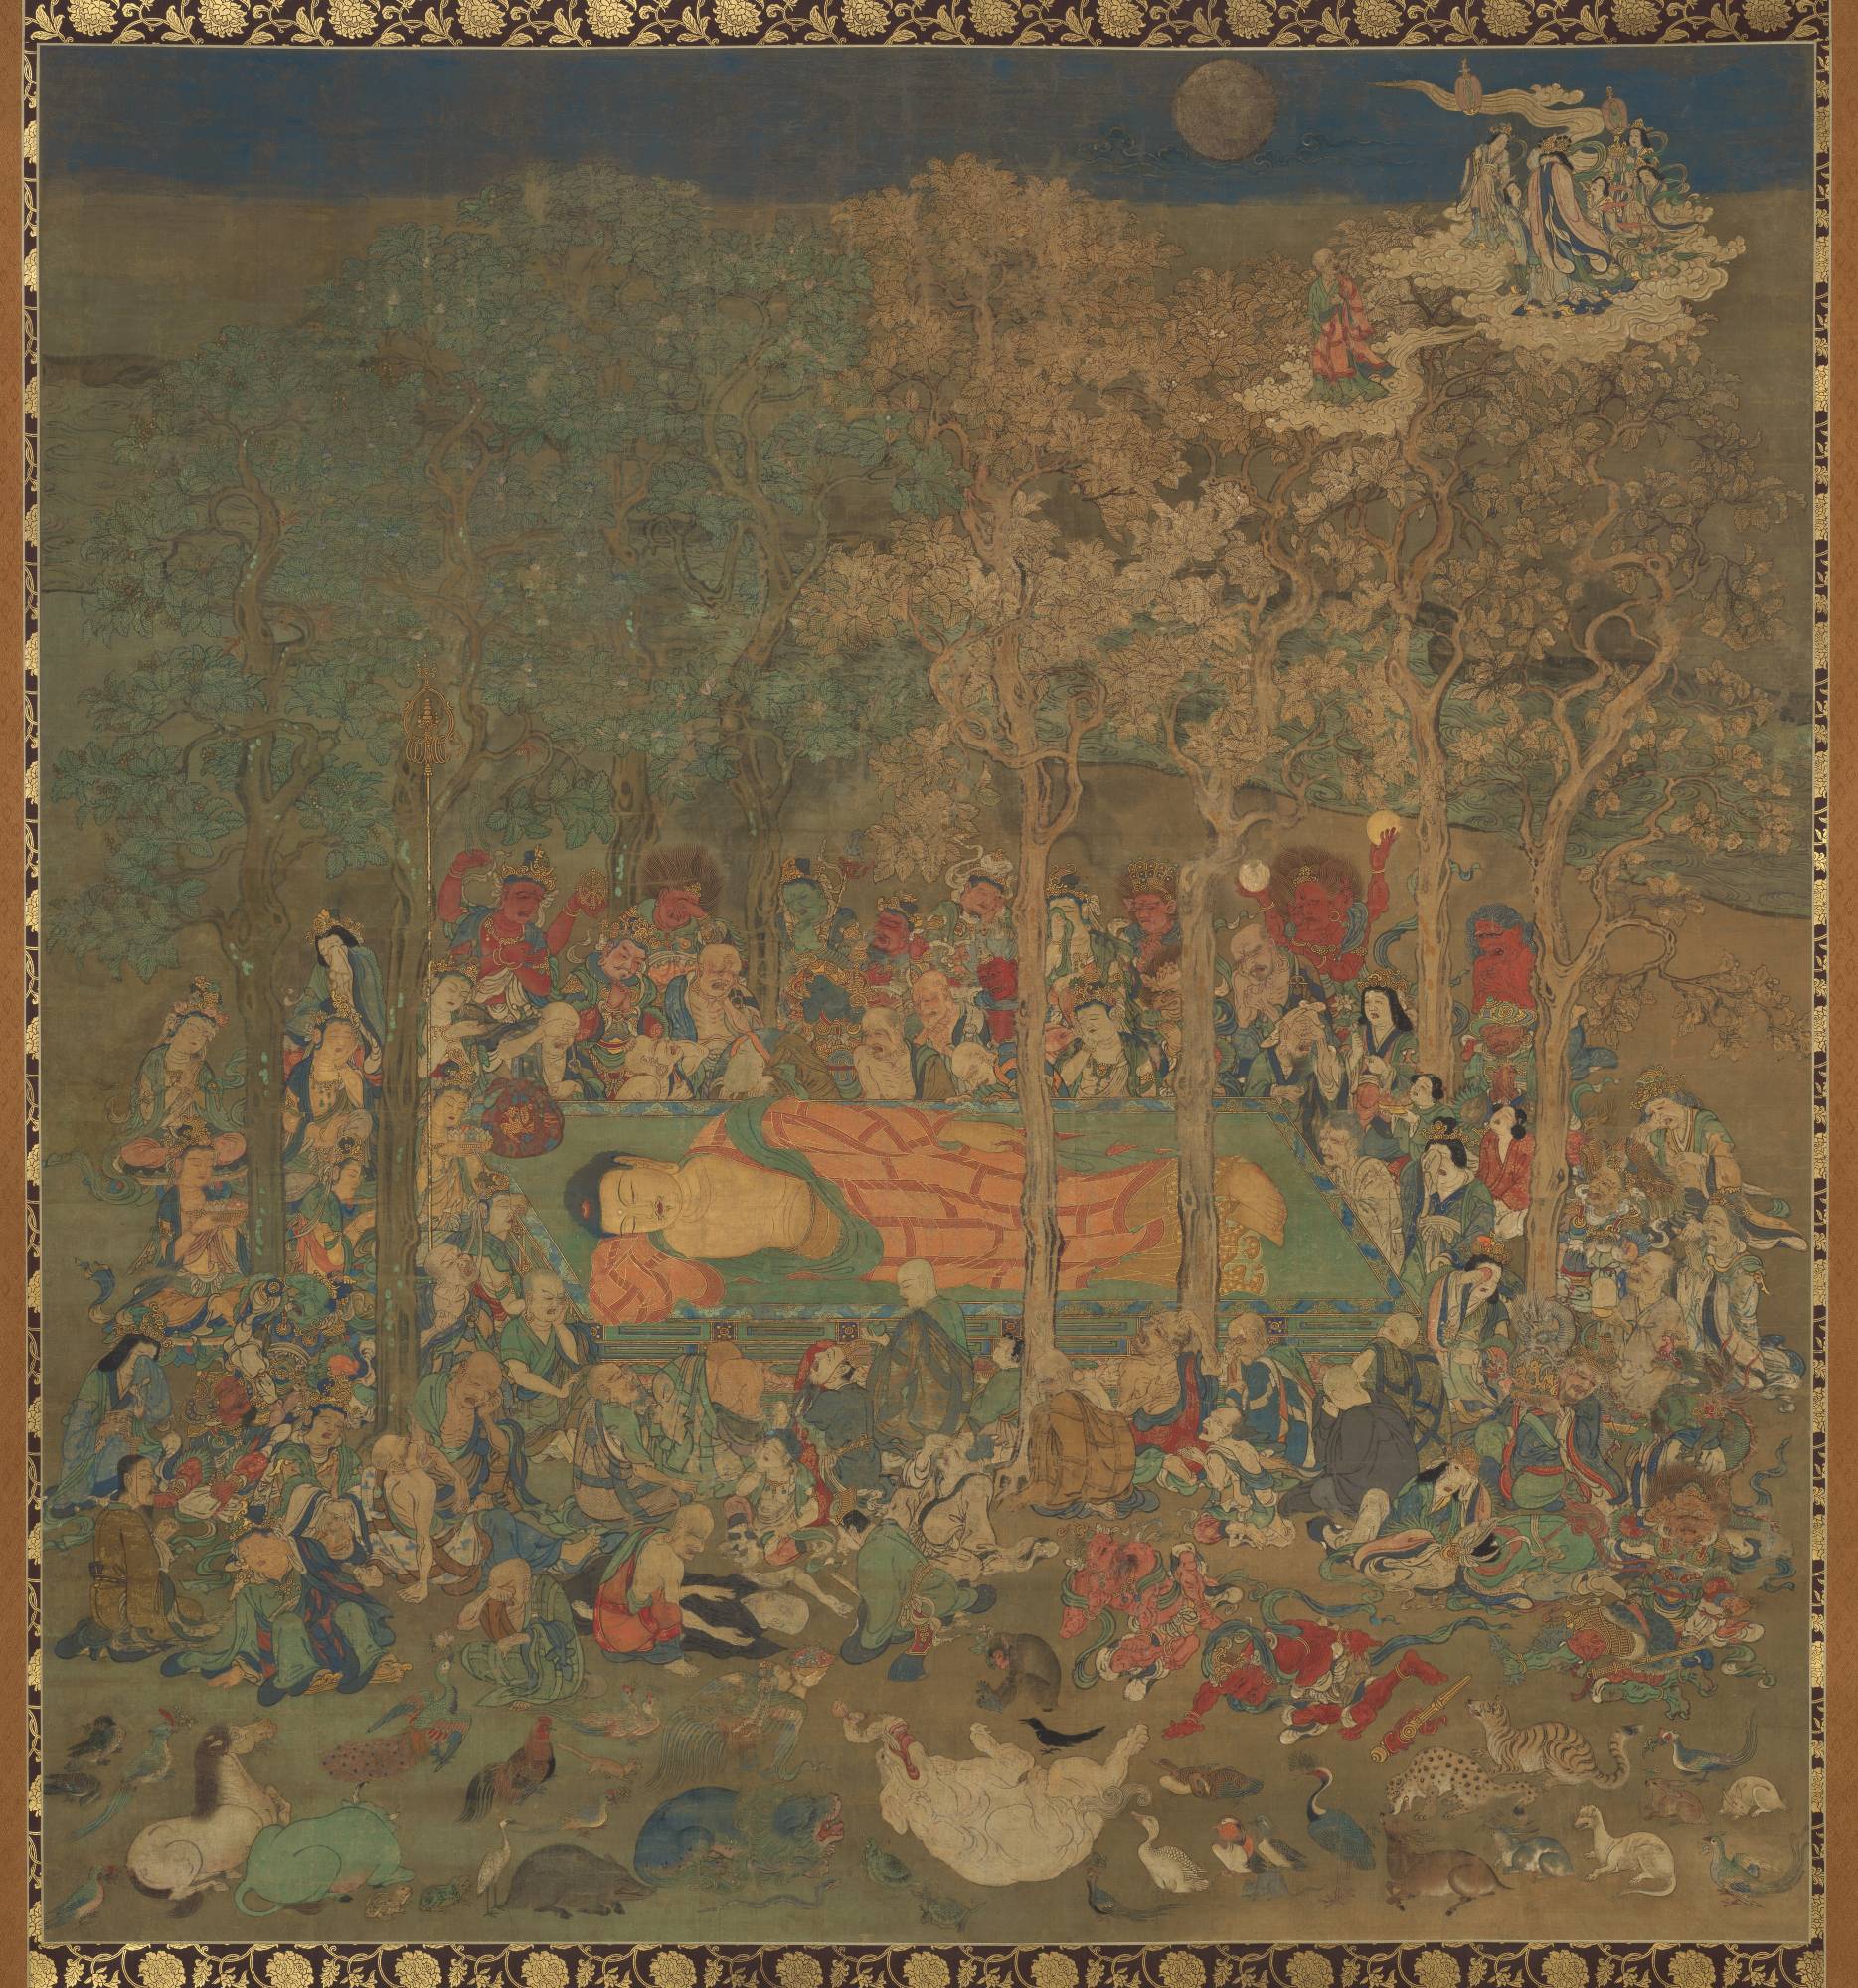 why) of Buddhist painting Times The suffering Japan a 700-year-old How - (and enjoy to